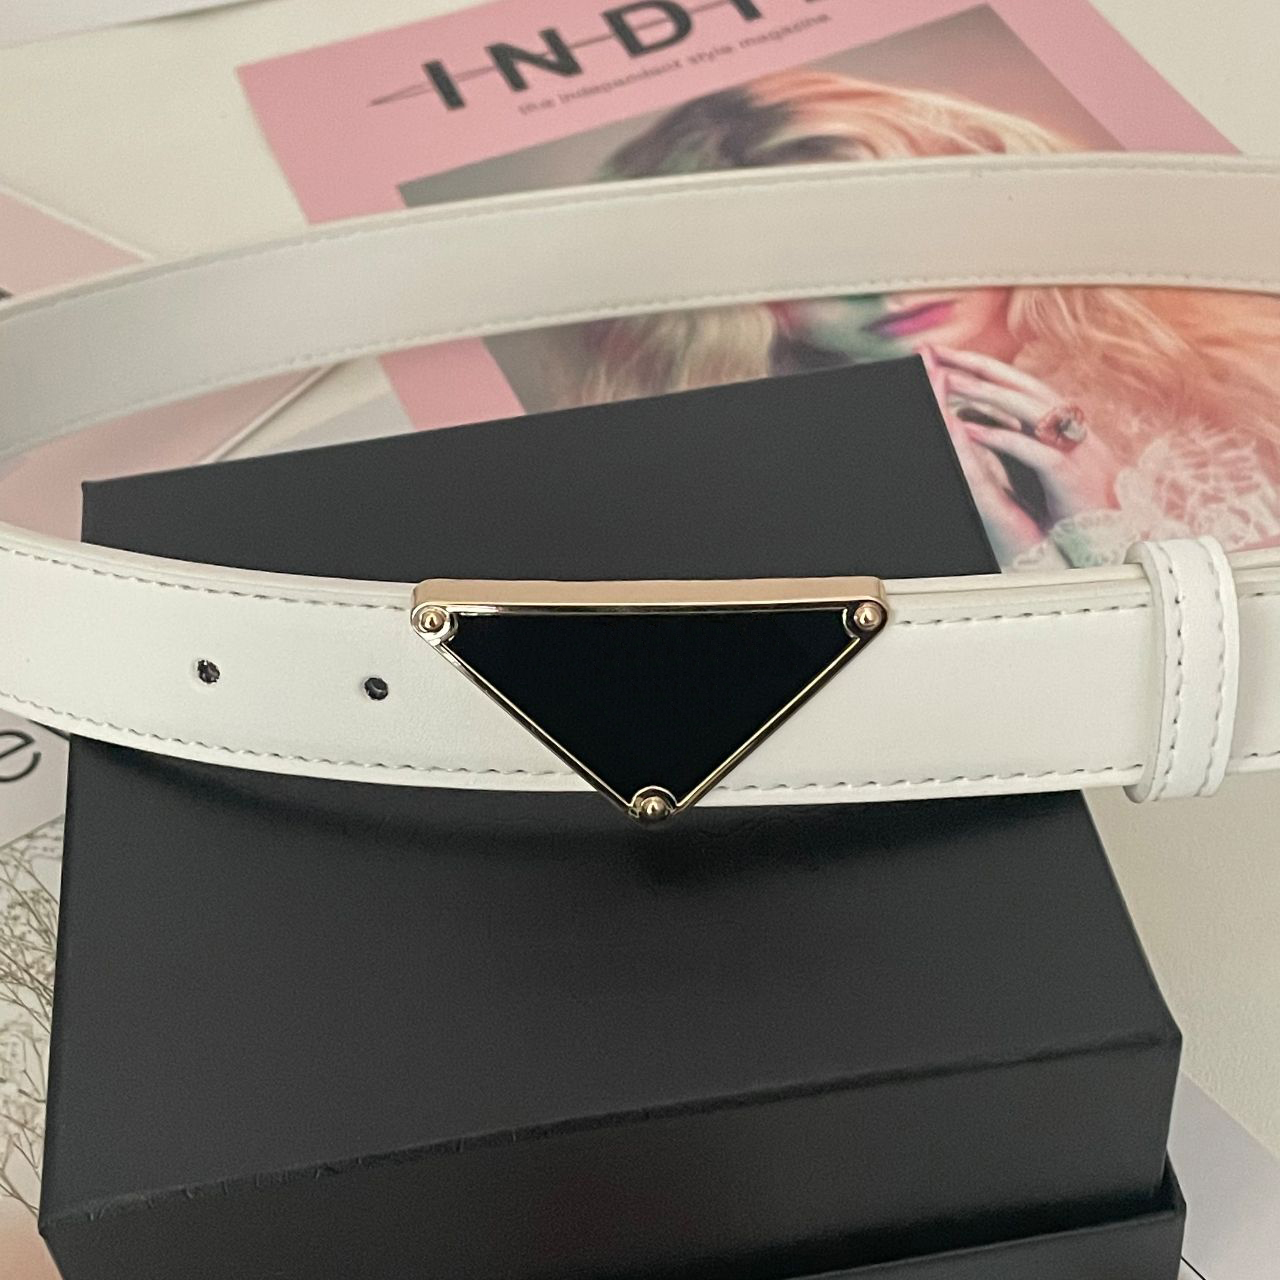 Designer Belt Luxury Women Belts Fashion Classical BiG Smooth Buckle Real Leather Strap 3 0cm Width With Box Black White Red Yello200L